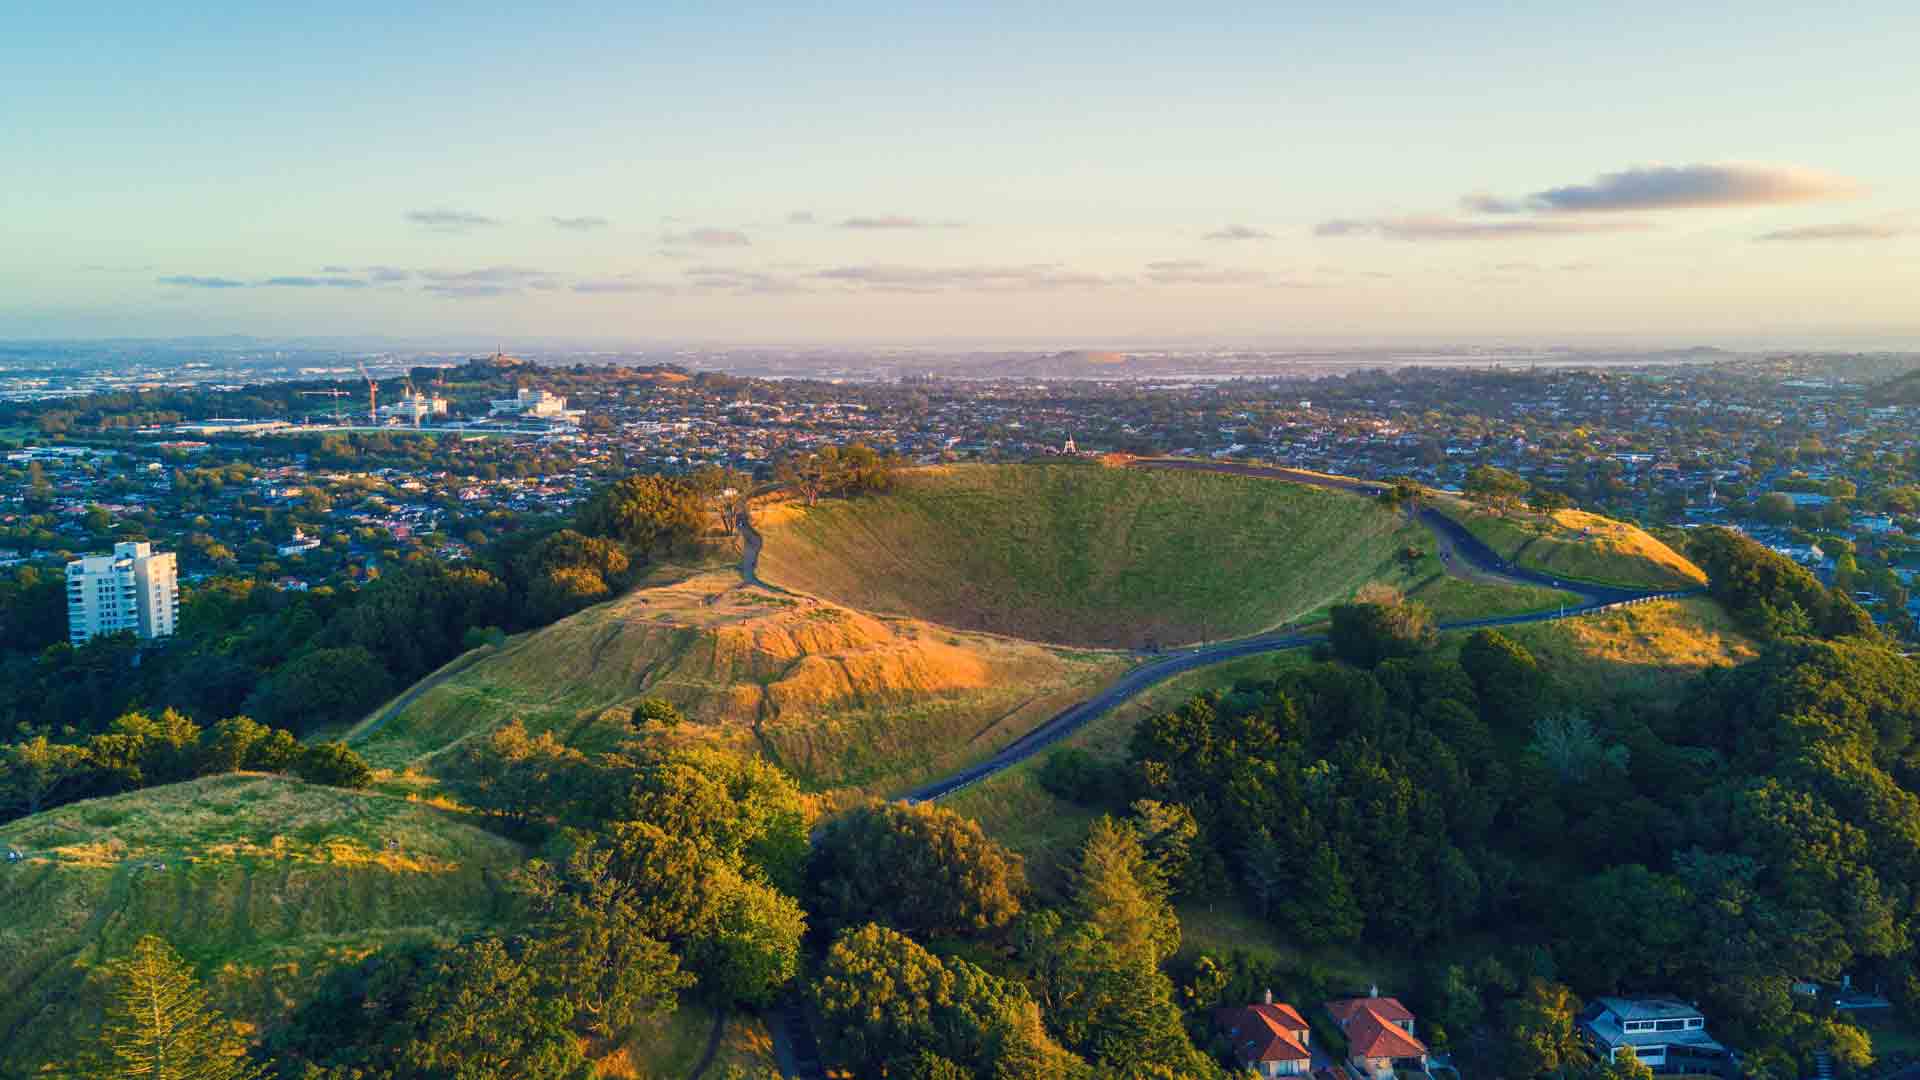 You can even commute from Mt. Eden to the CBD by bike or on foot.